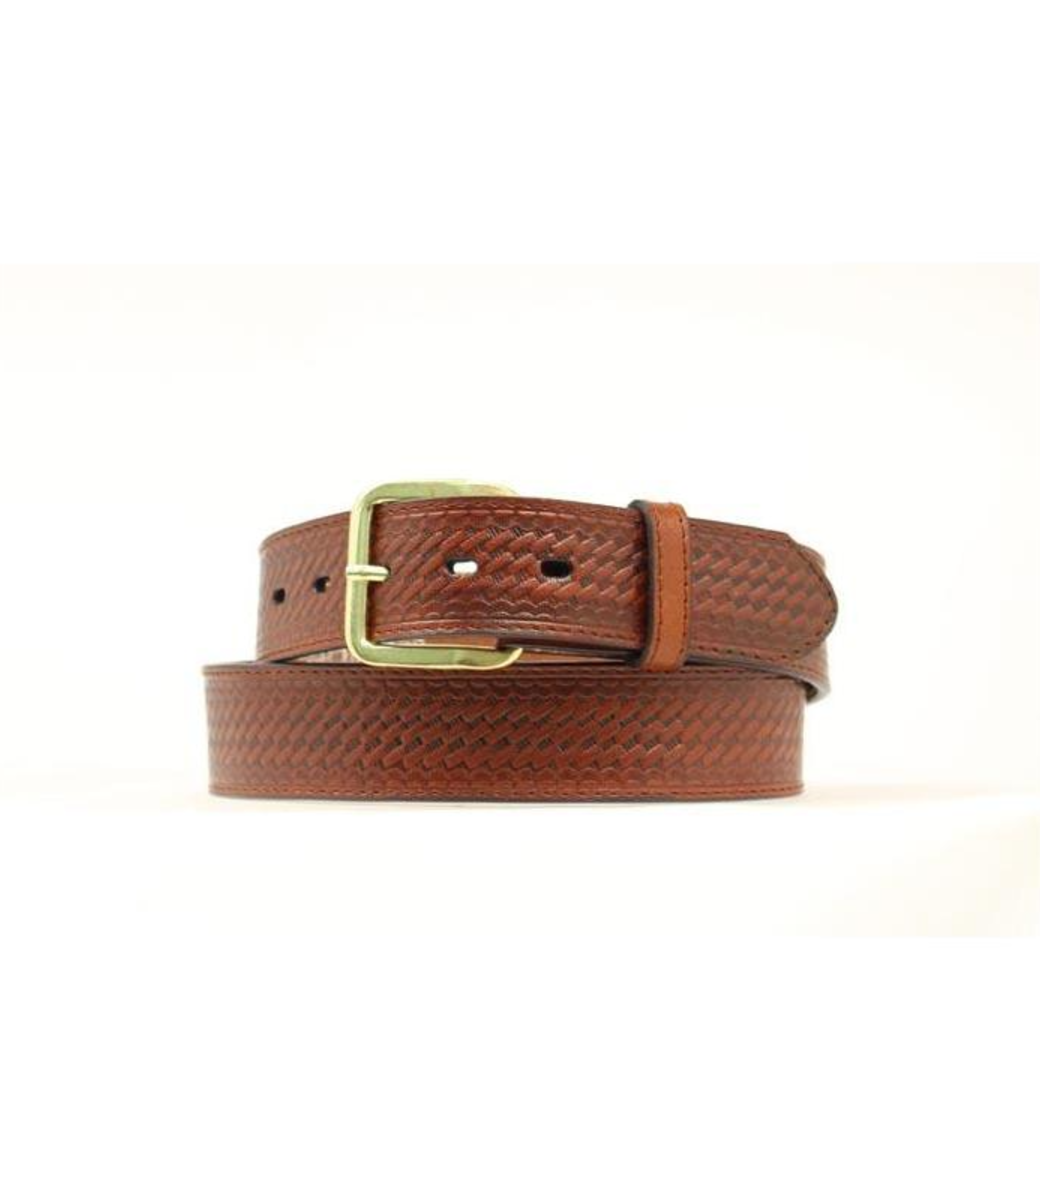 1-1/2" Embroidered Belt w/Bill Compartment